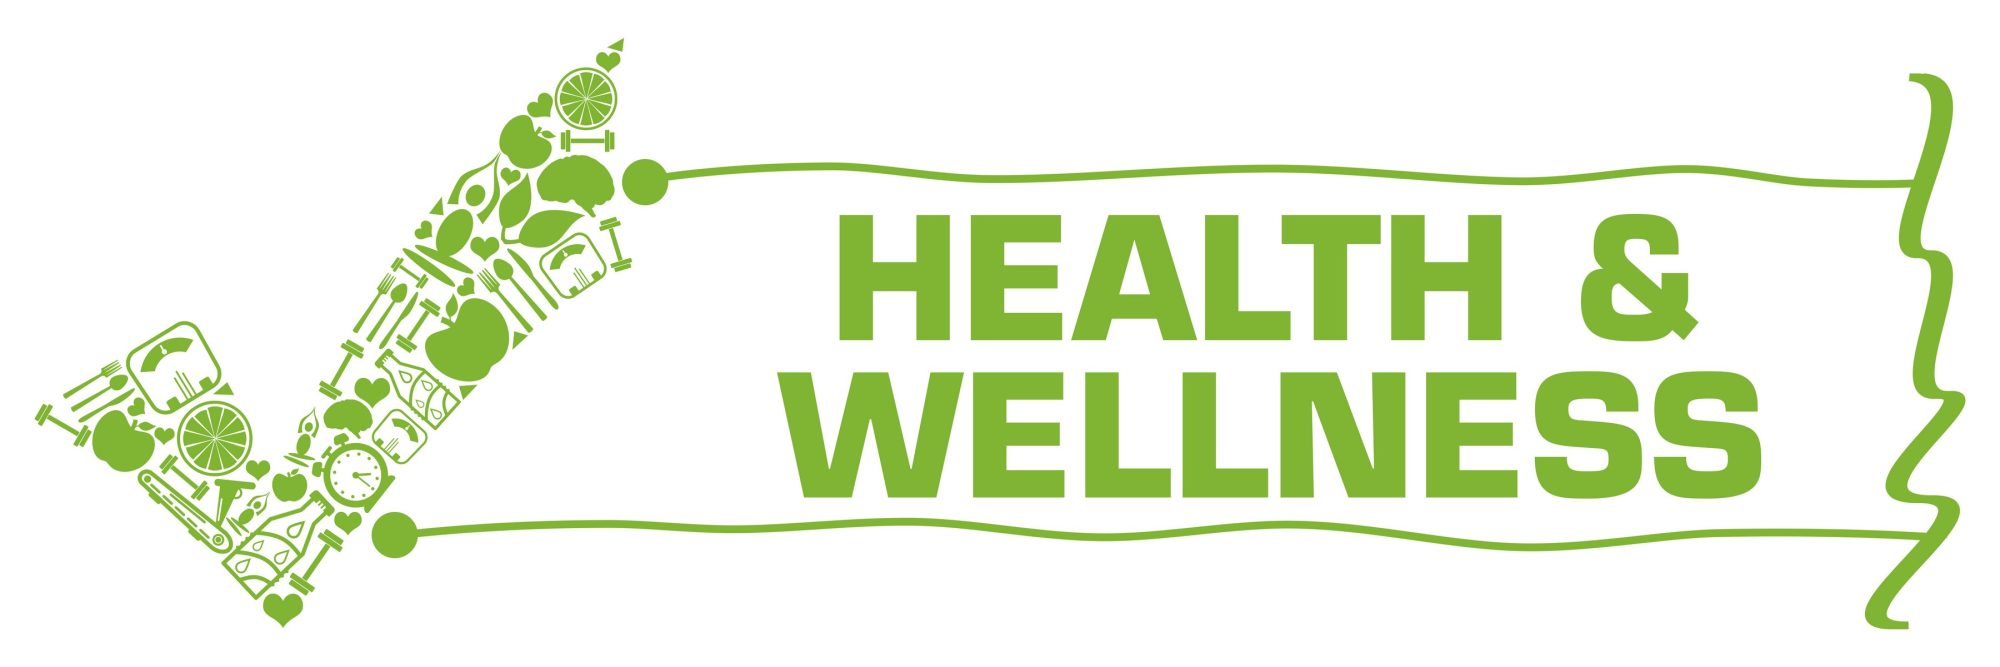 Healthy Vending Omaha | Workplace Wellness | Healthy Employees